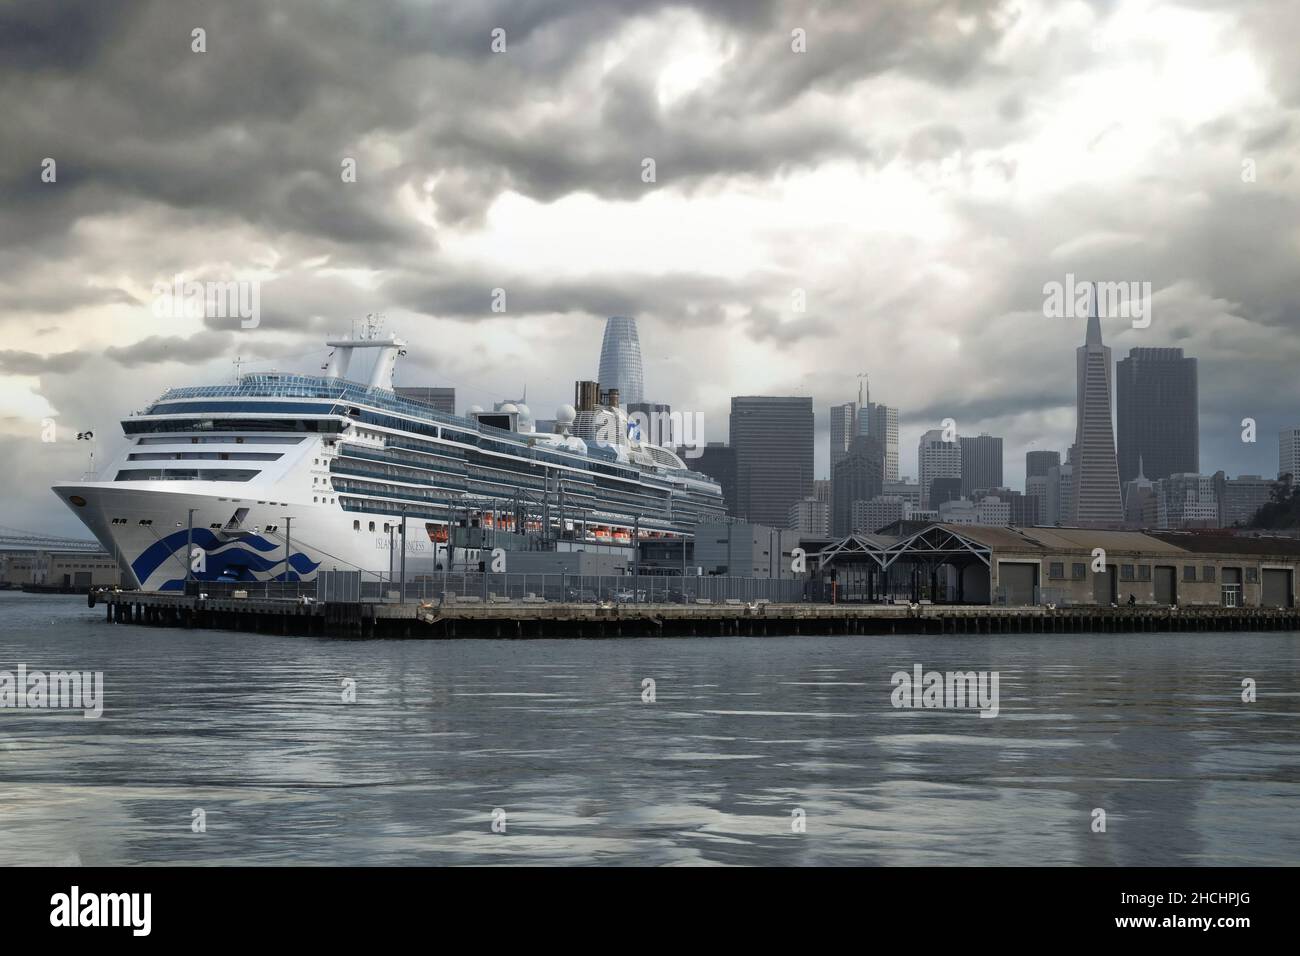 SAN FRANCISCO, USA , The Star Princess cruise ship docked in San Francisco harbour with the city skyline behind, April 2019 Stock Photo